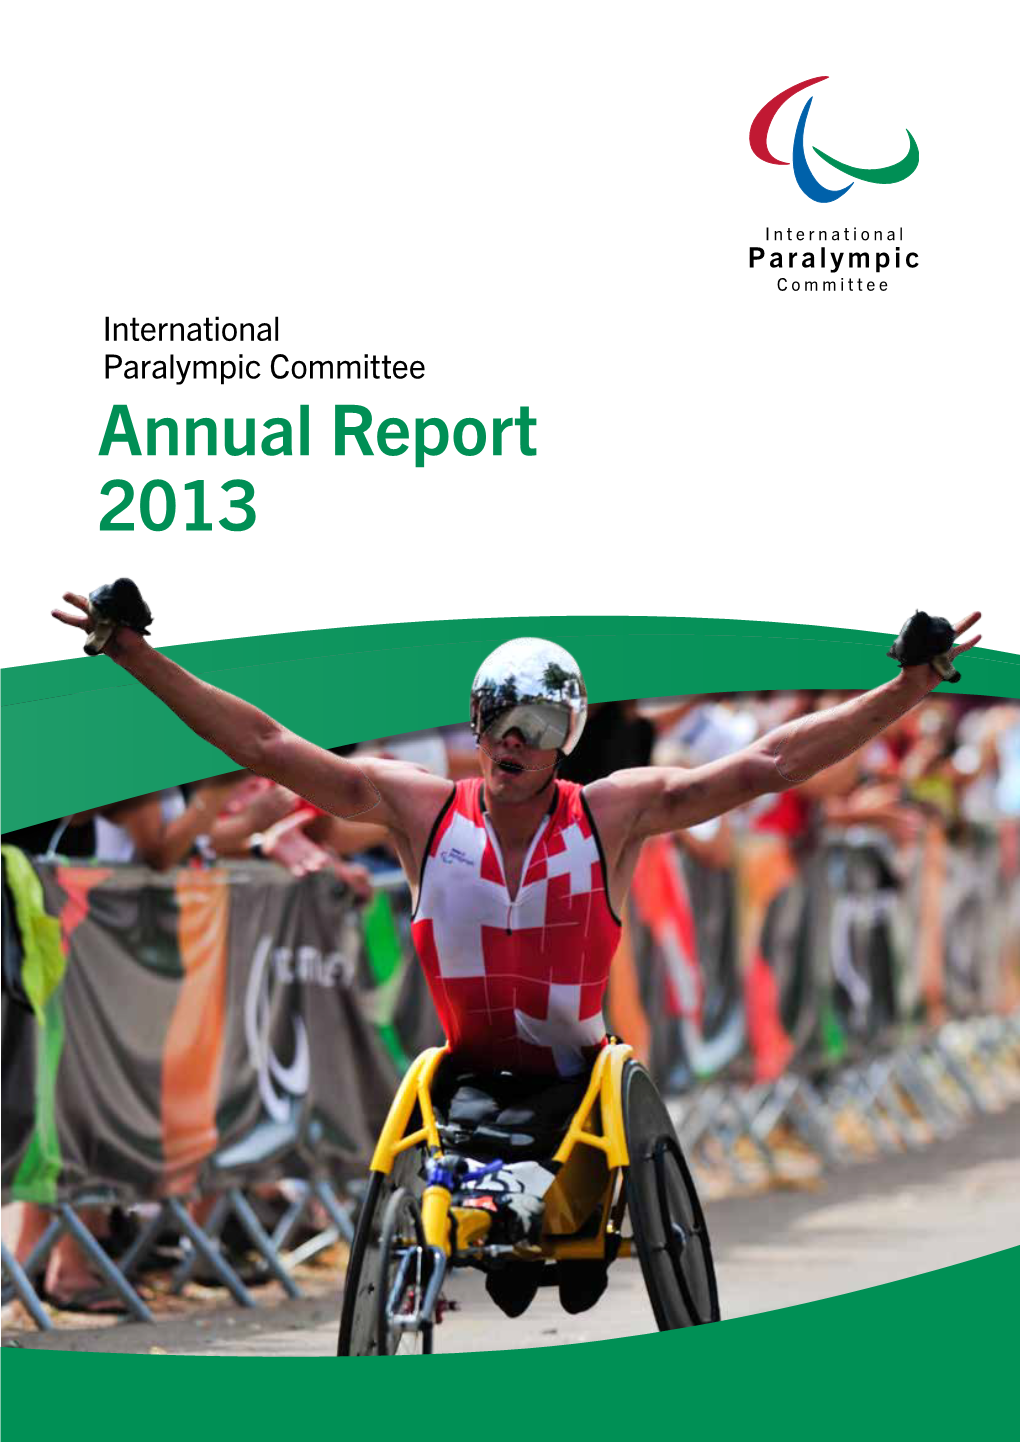 Annual Report 2013 Contents